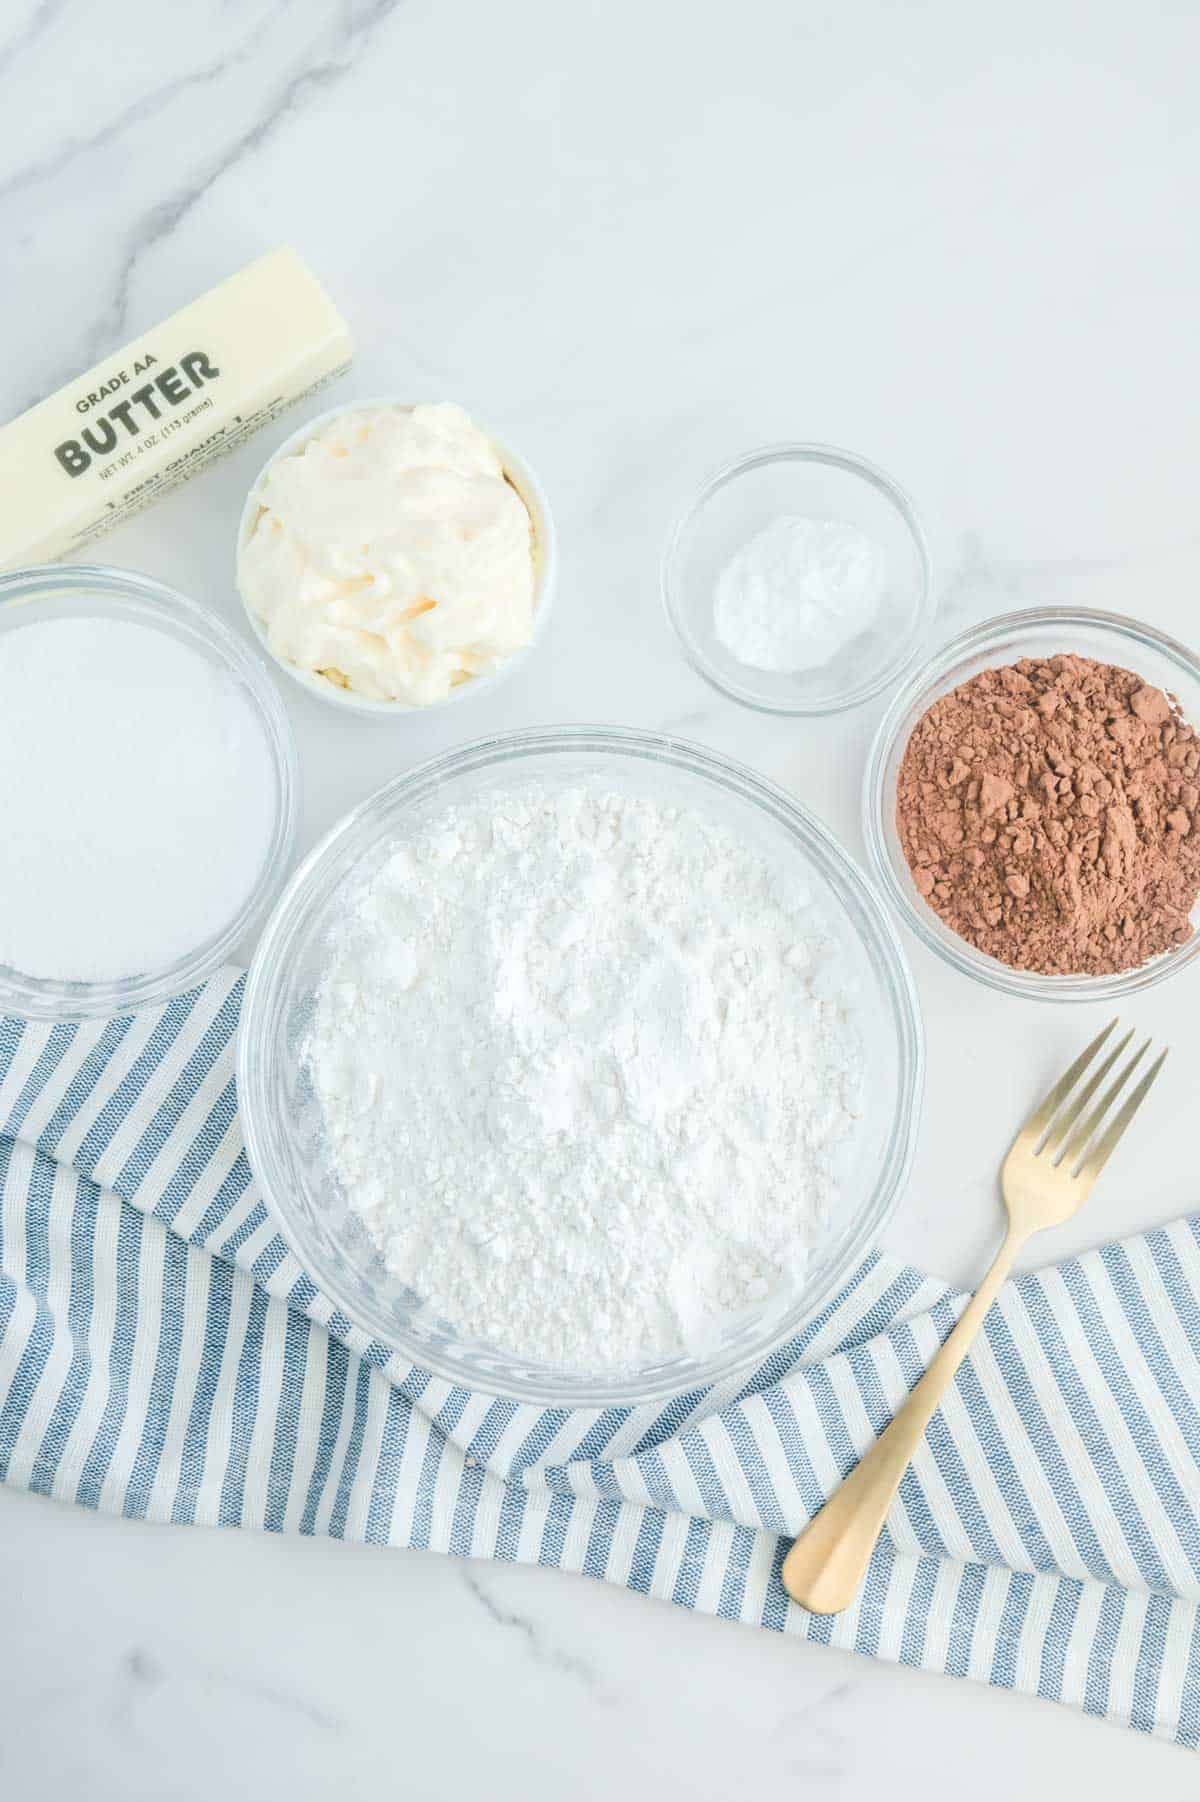 Chocolate mayonnaise cake frosting ingredients.